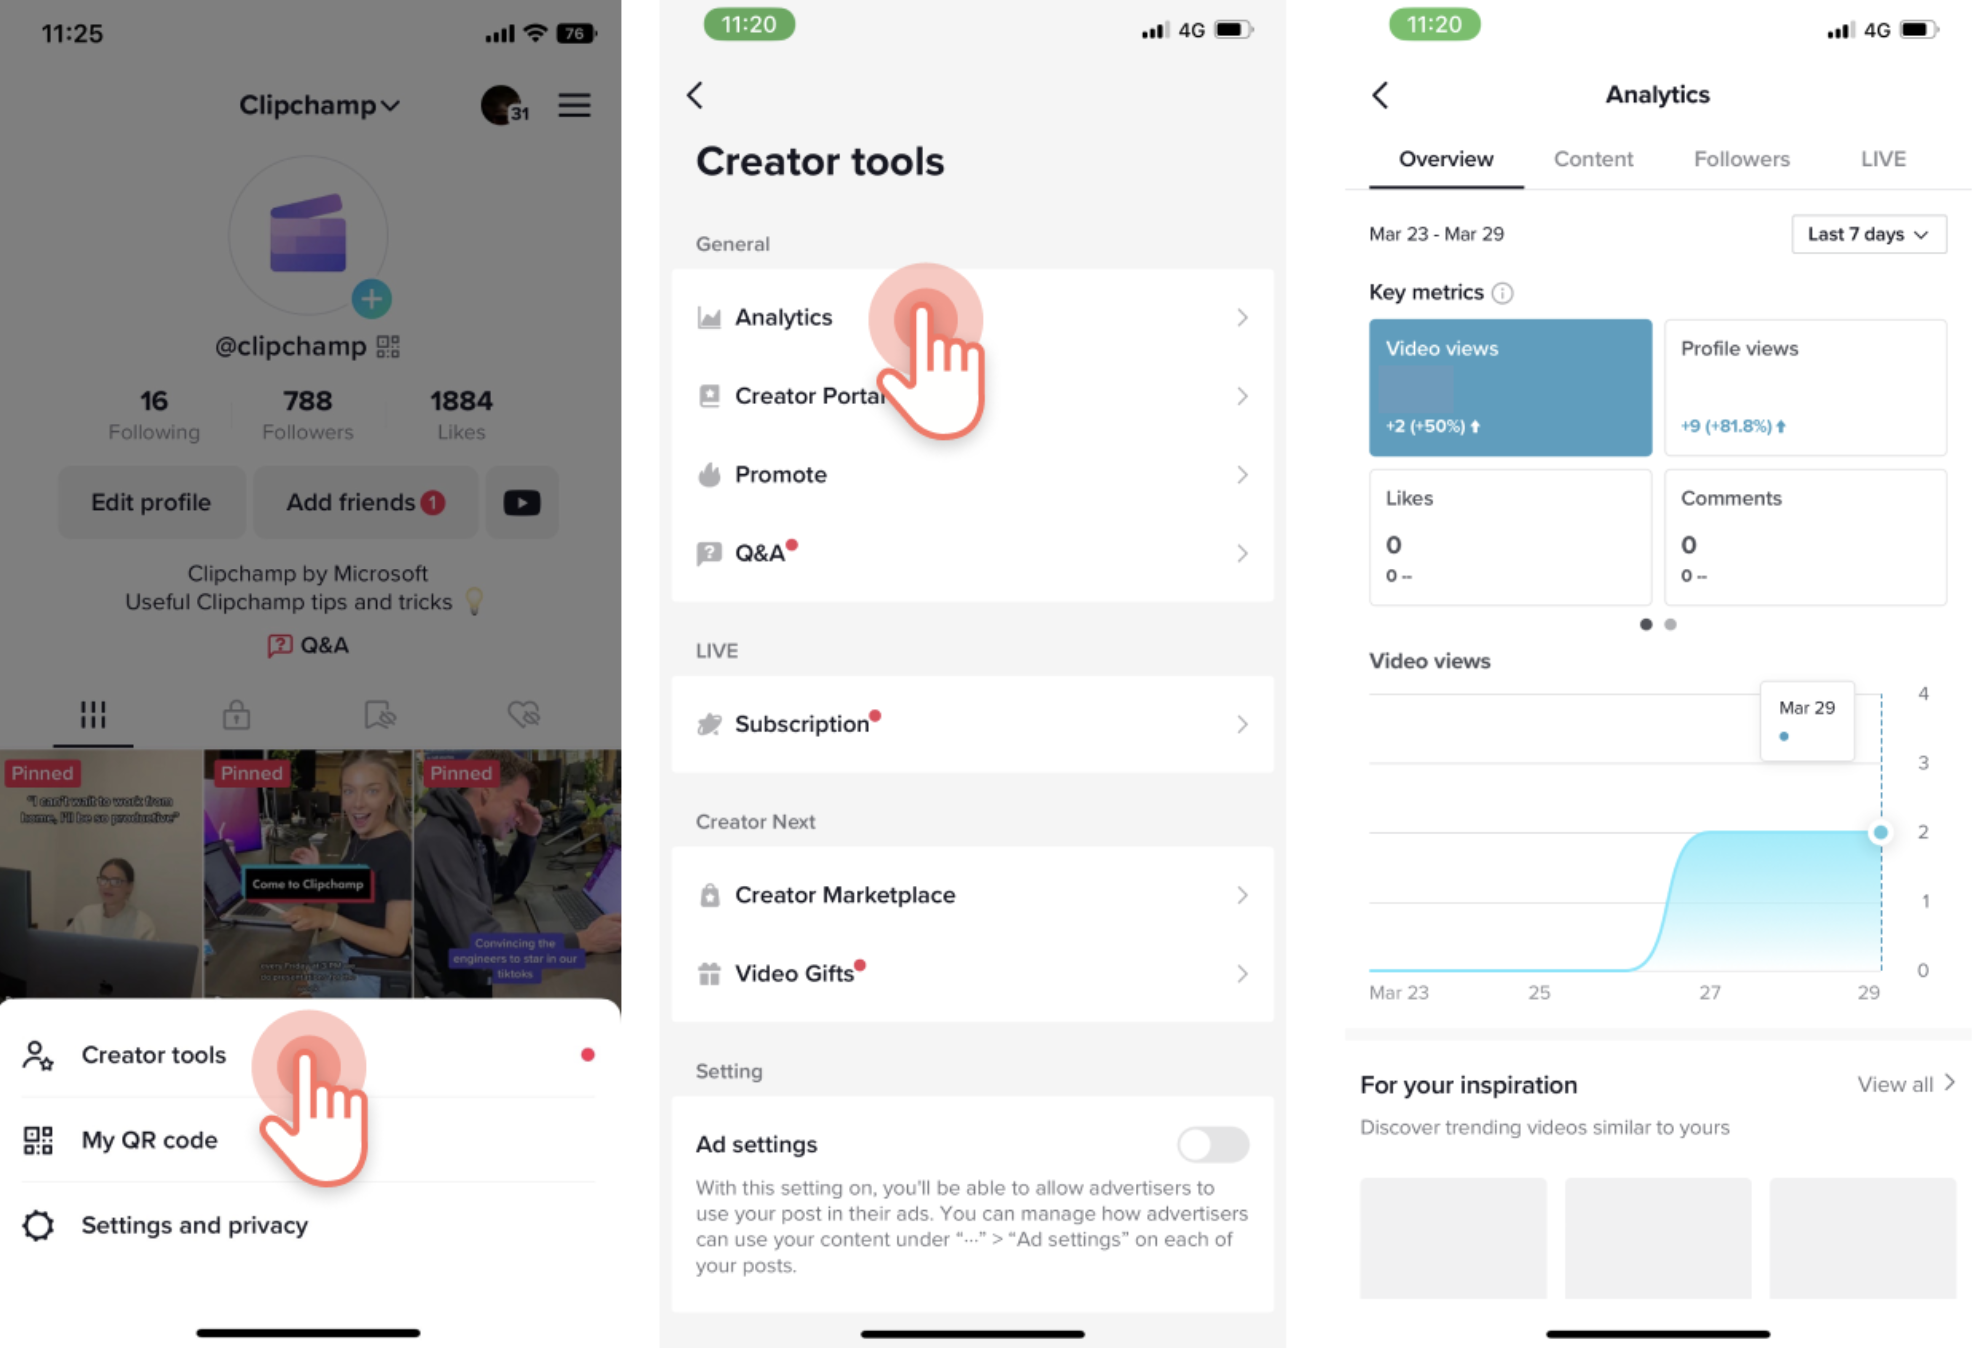 Screenshot of how to access TikTok's analytics platform from the mobile app